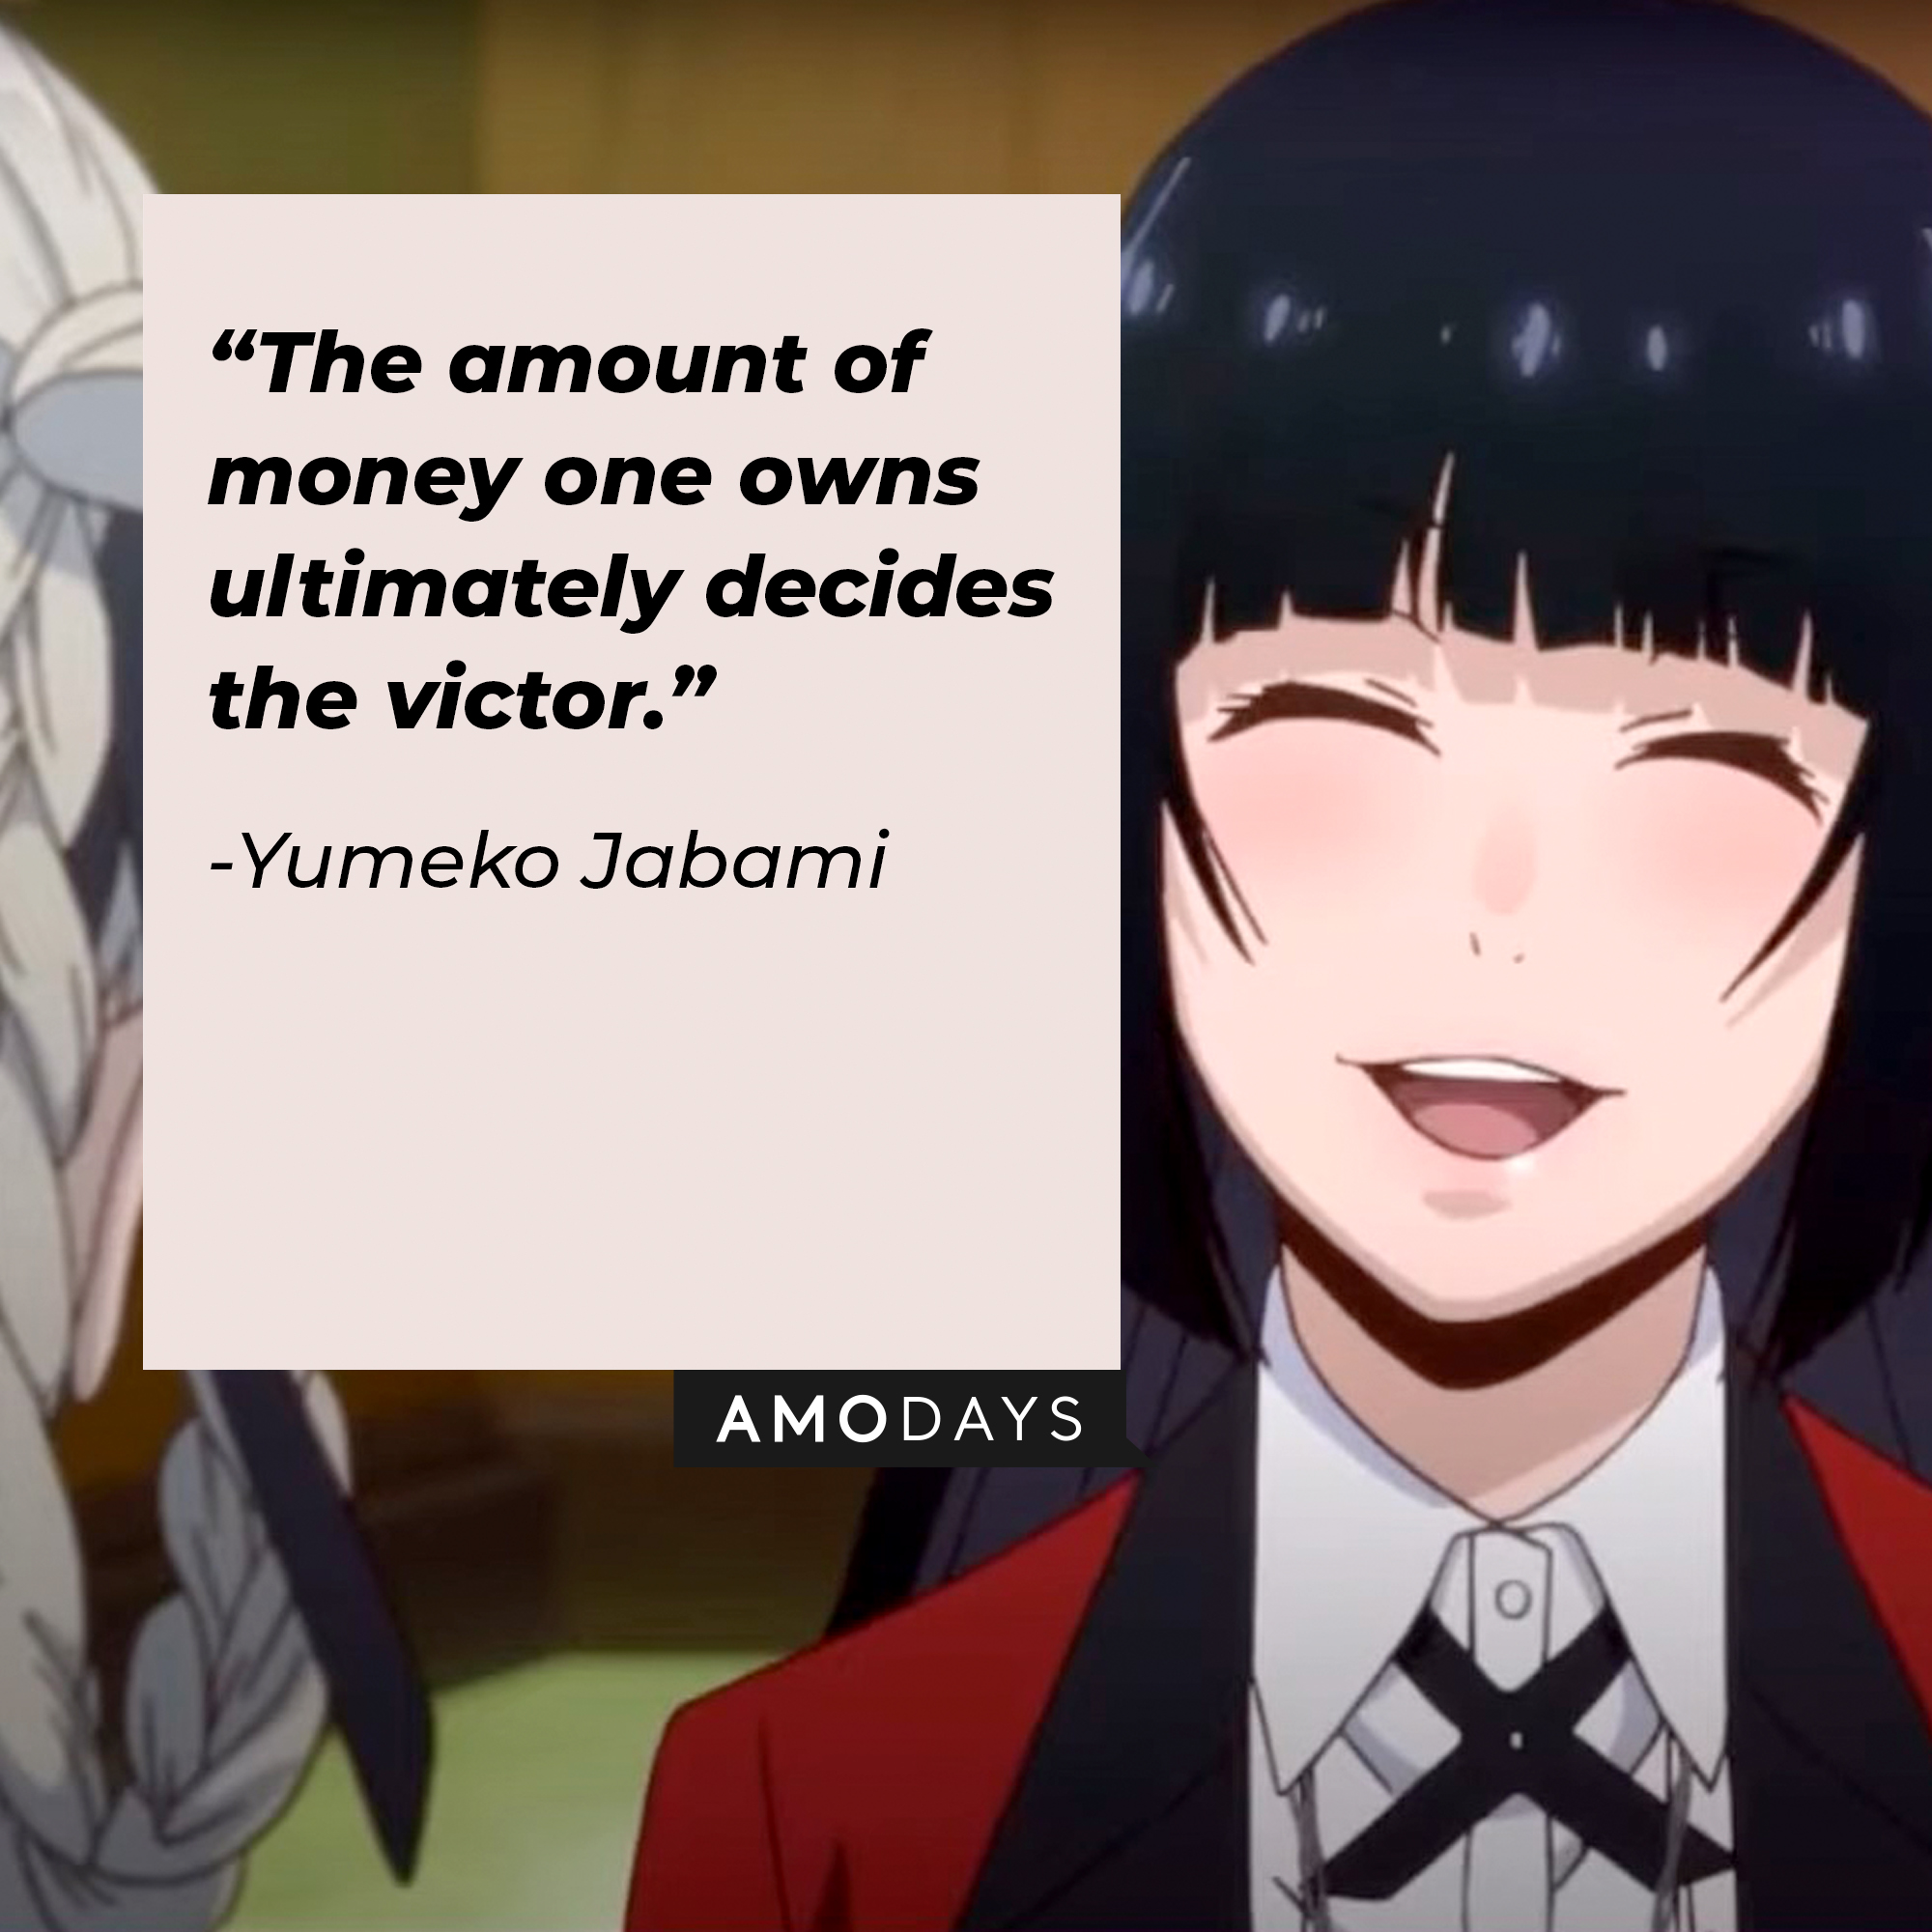 A picture of Yumeko Jabami with her quote: “The amount of money one owns ultimately decides the victor." | Source: youtube.com/netflixanime